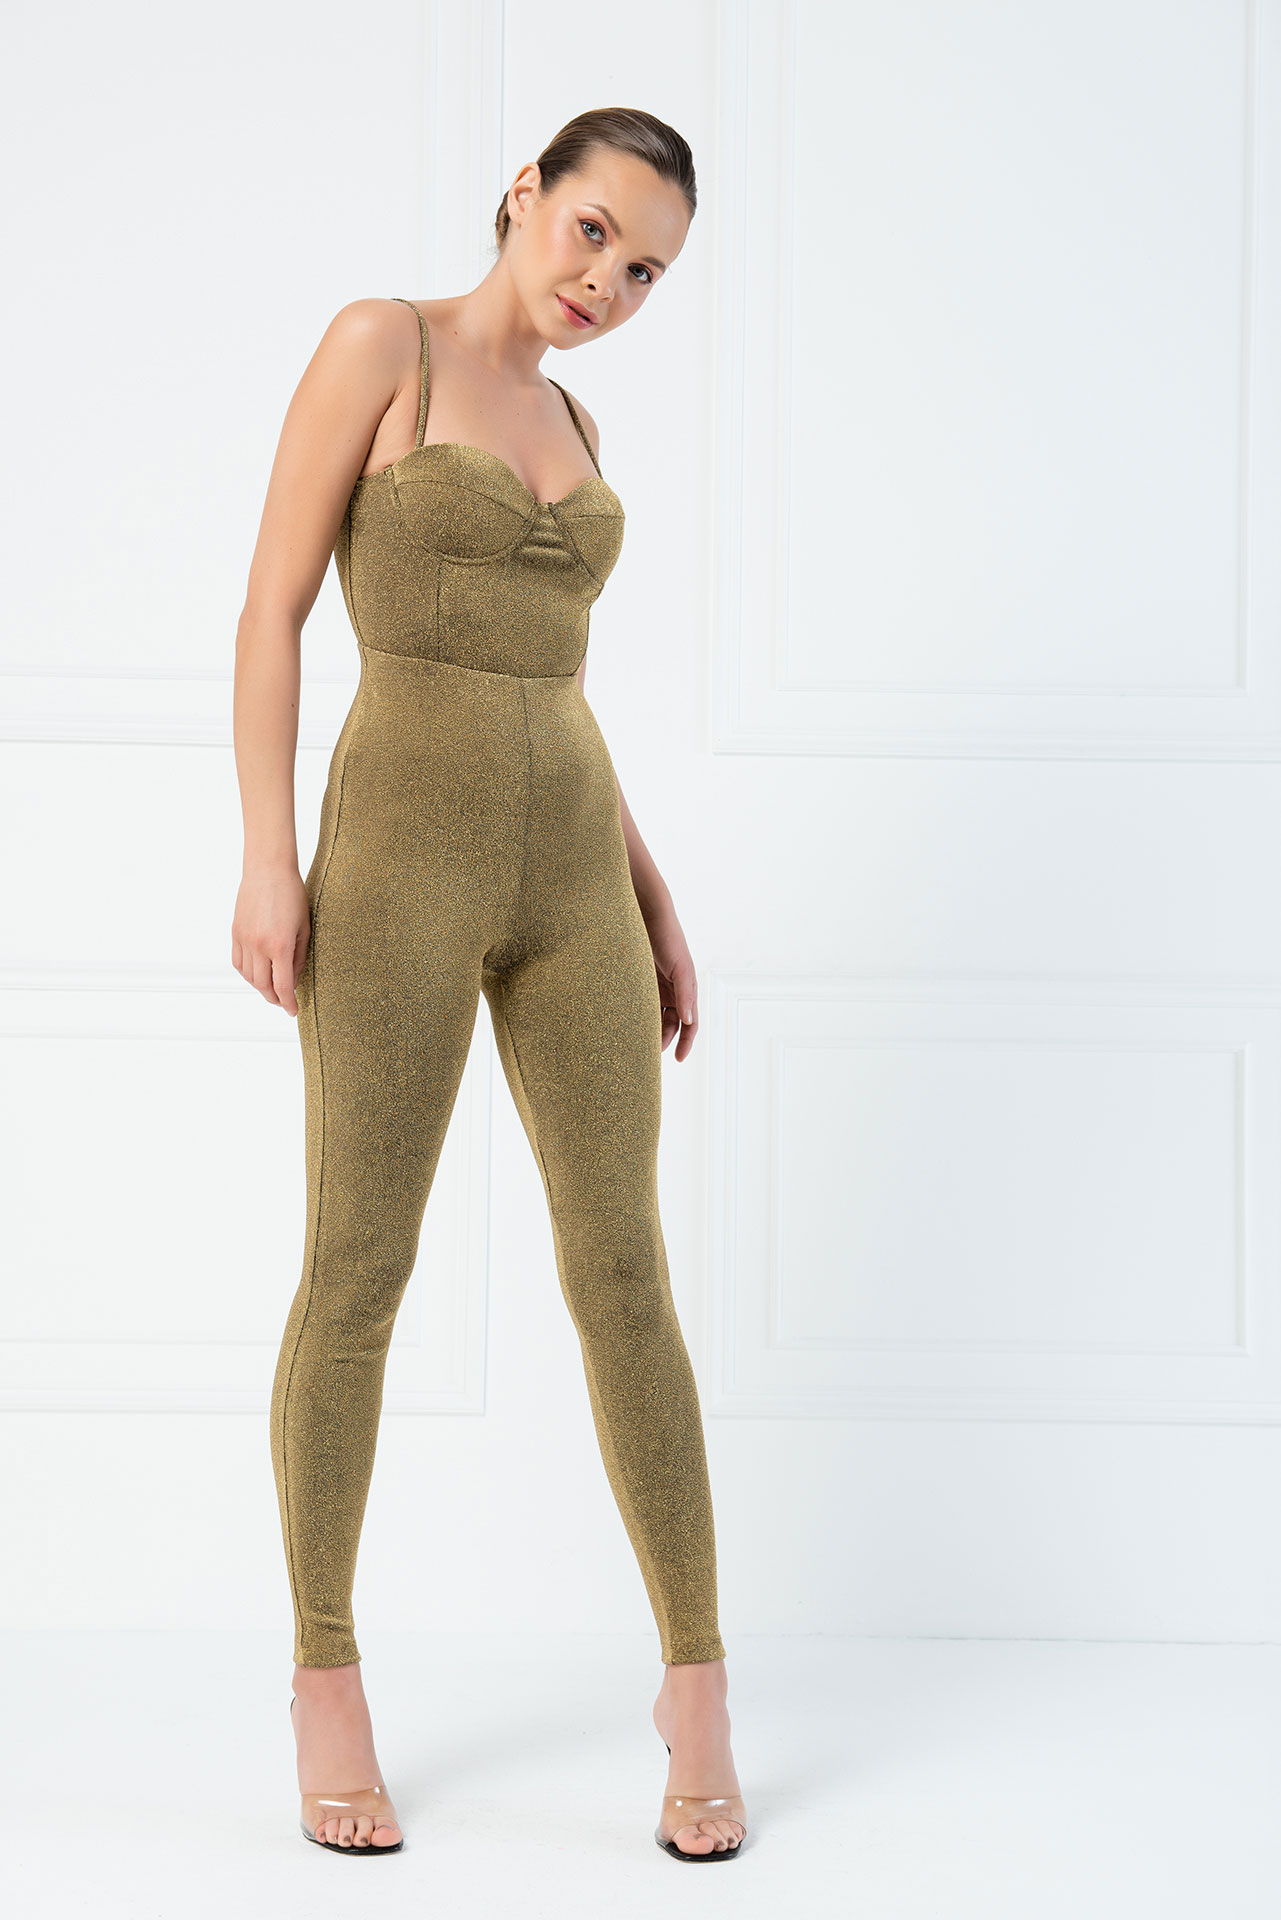 Glittery Gold Sweetheart Catsuit